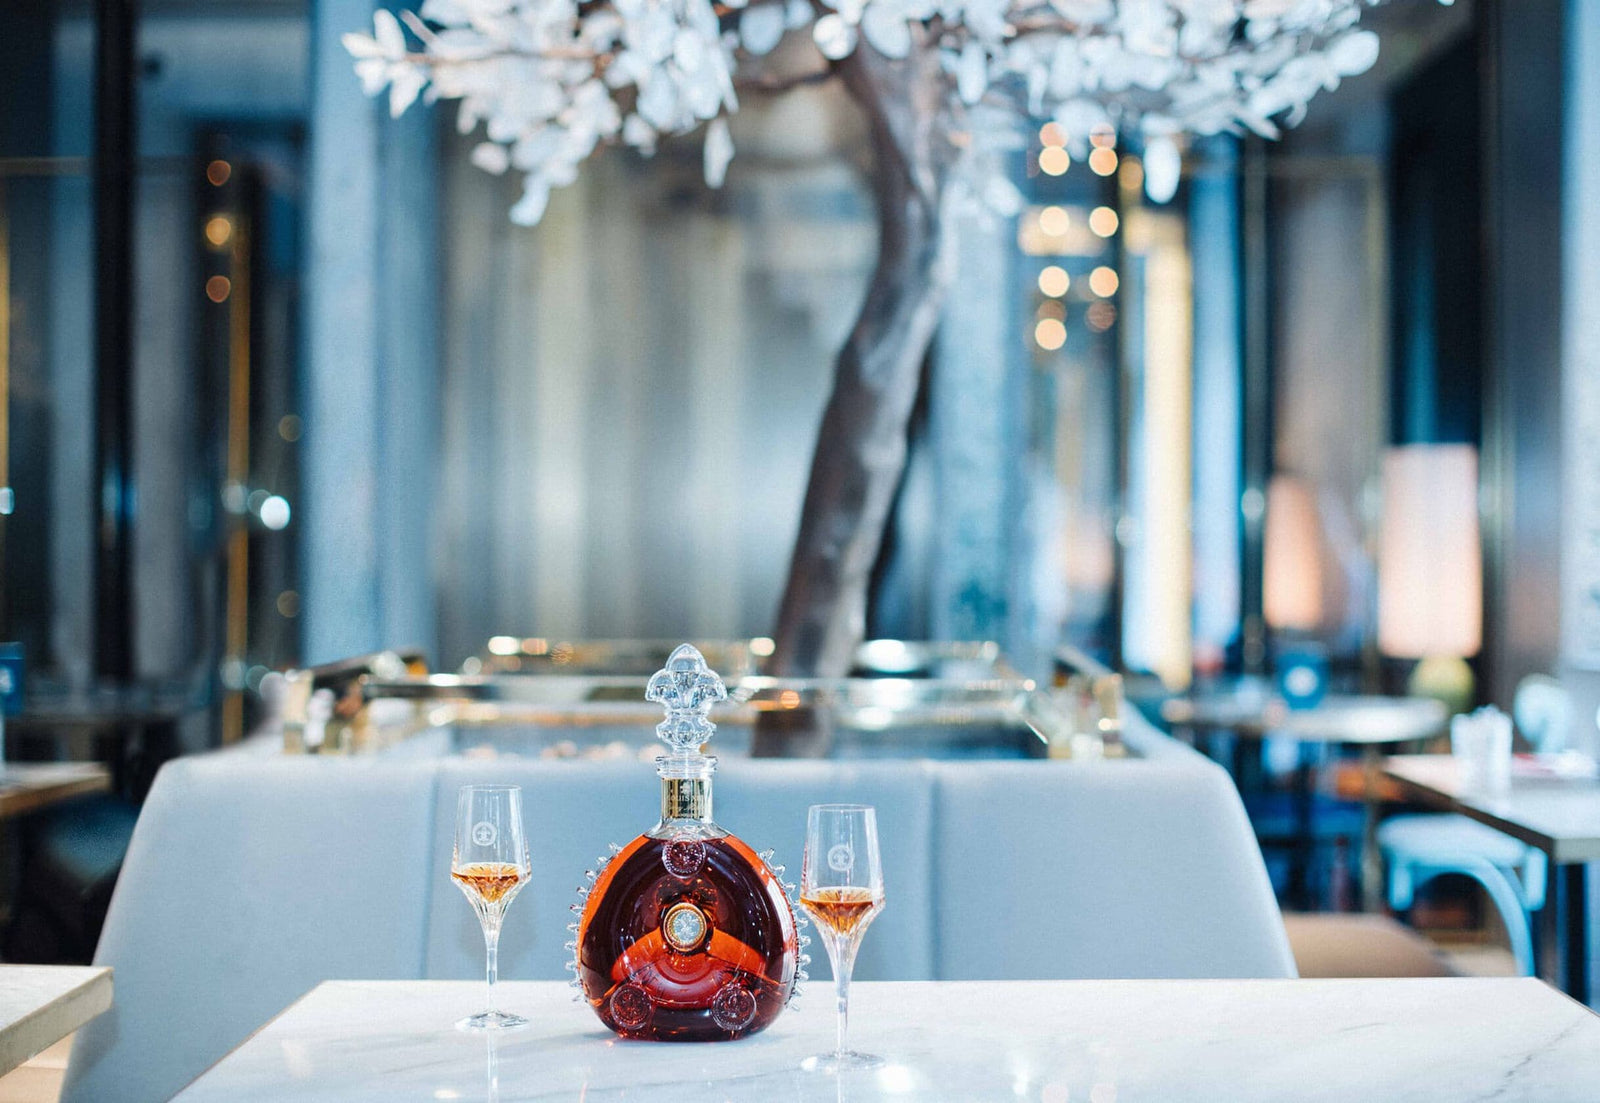 A lifstyle photo of LOUIS XIII decanter on a restaurant table, accompagned by two crystal glasses